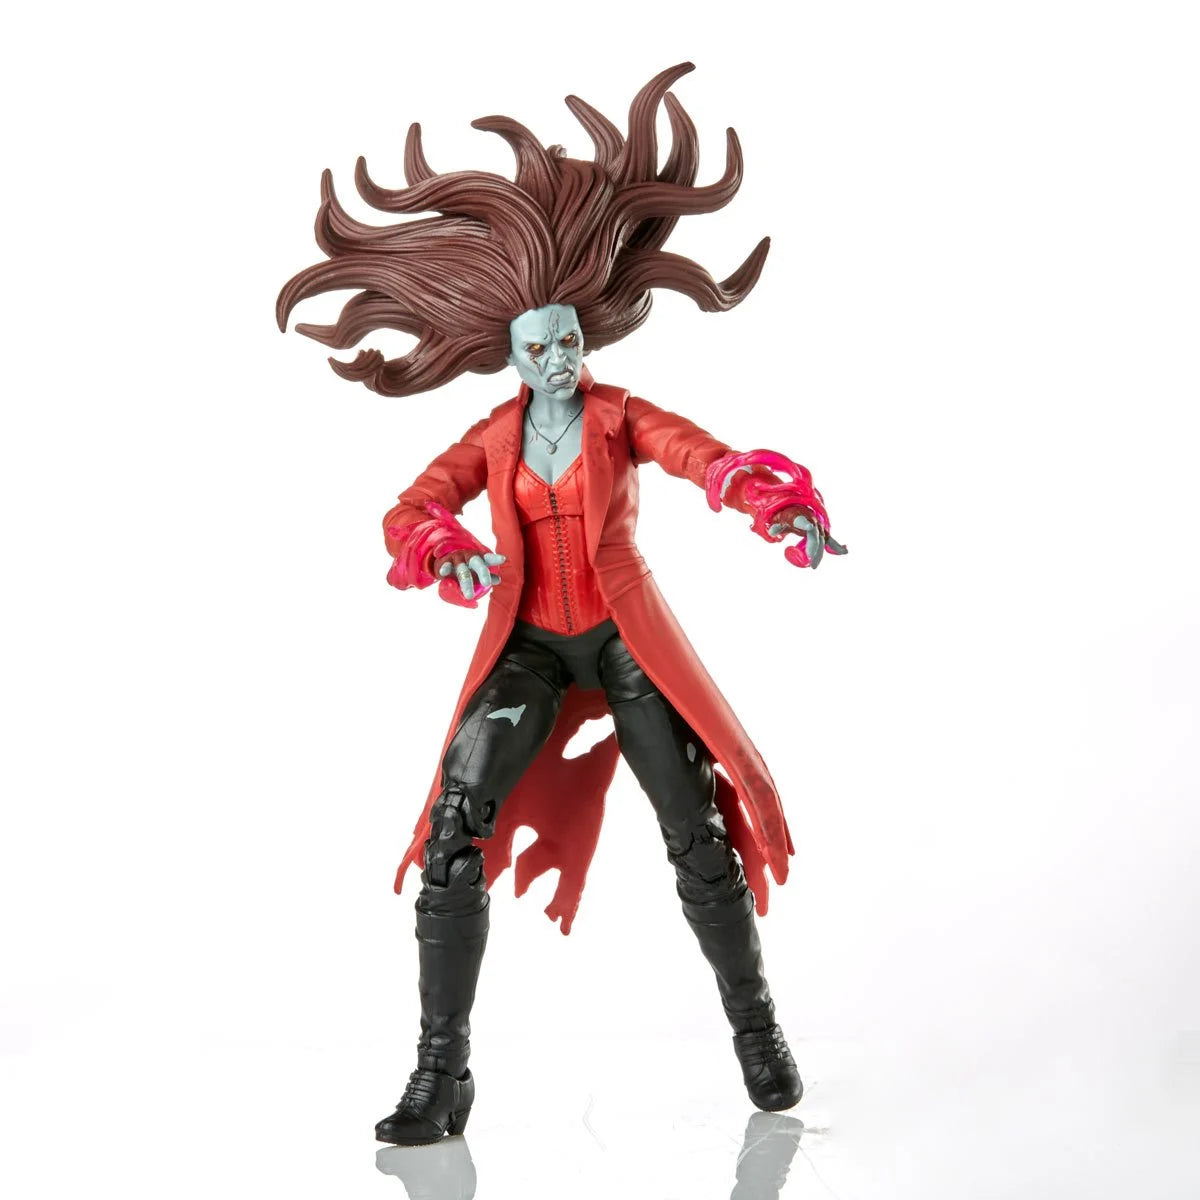 Marvel Legends What If? Zombie Scarlett Witch 6-Inch Action Figure